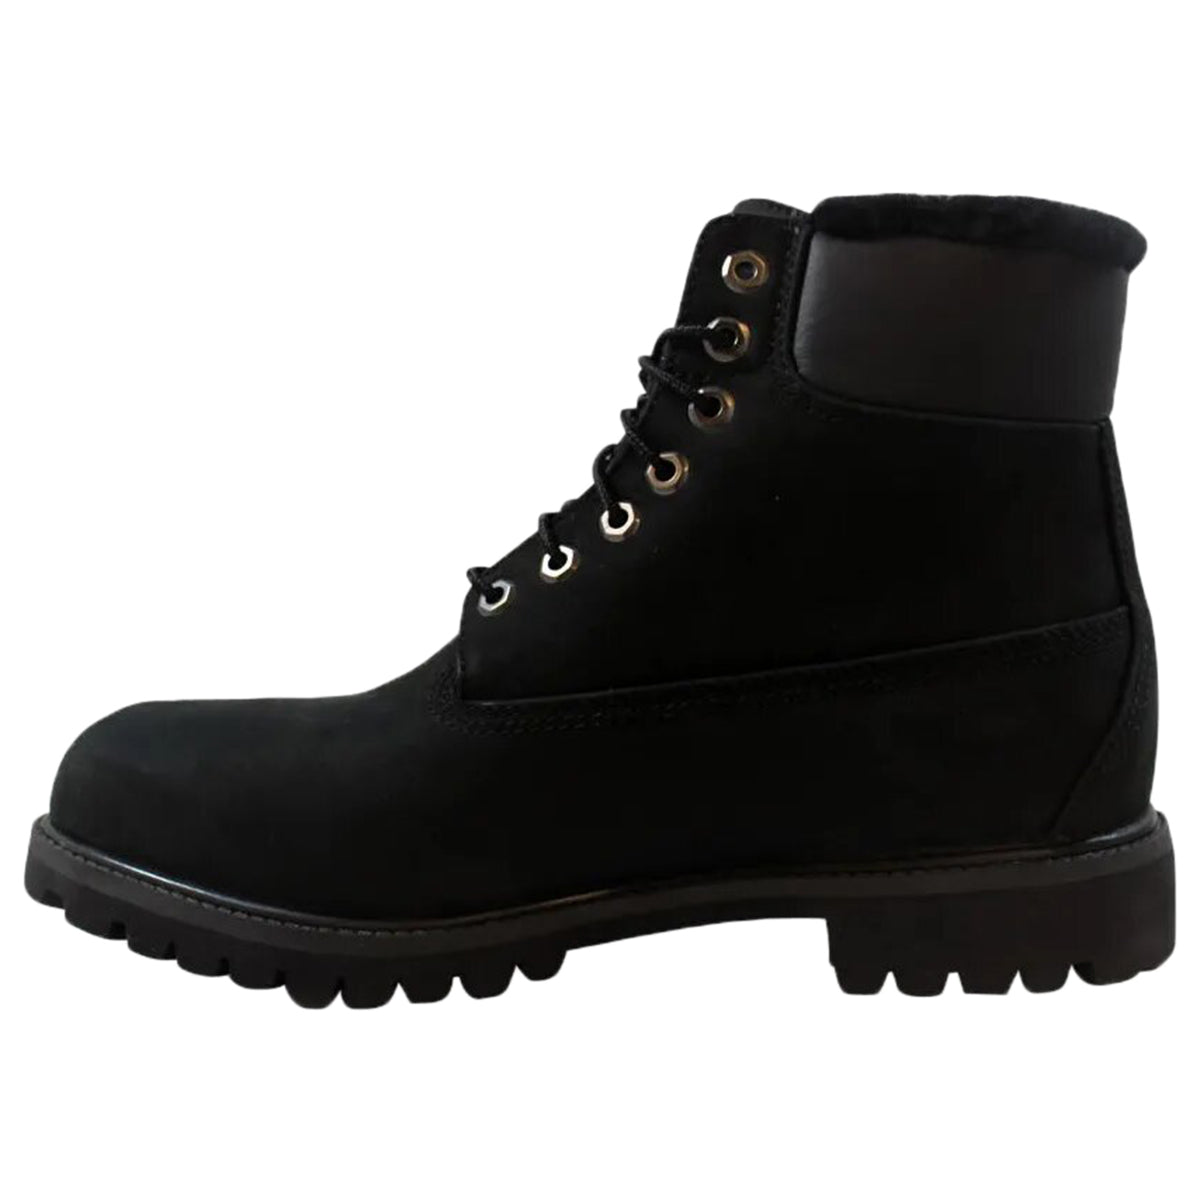 Timberland 6' Premium Boot Mens Style : Tb0a16gb